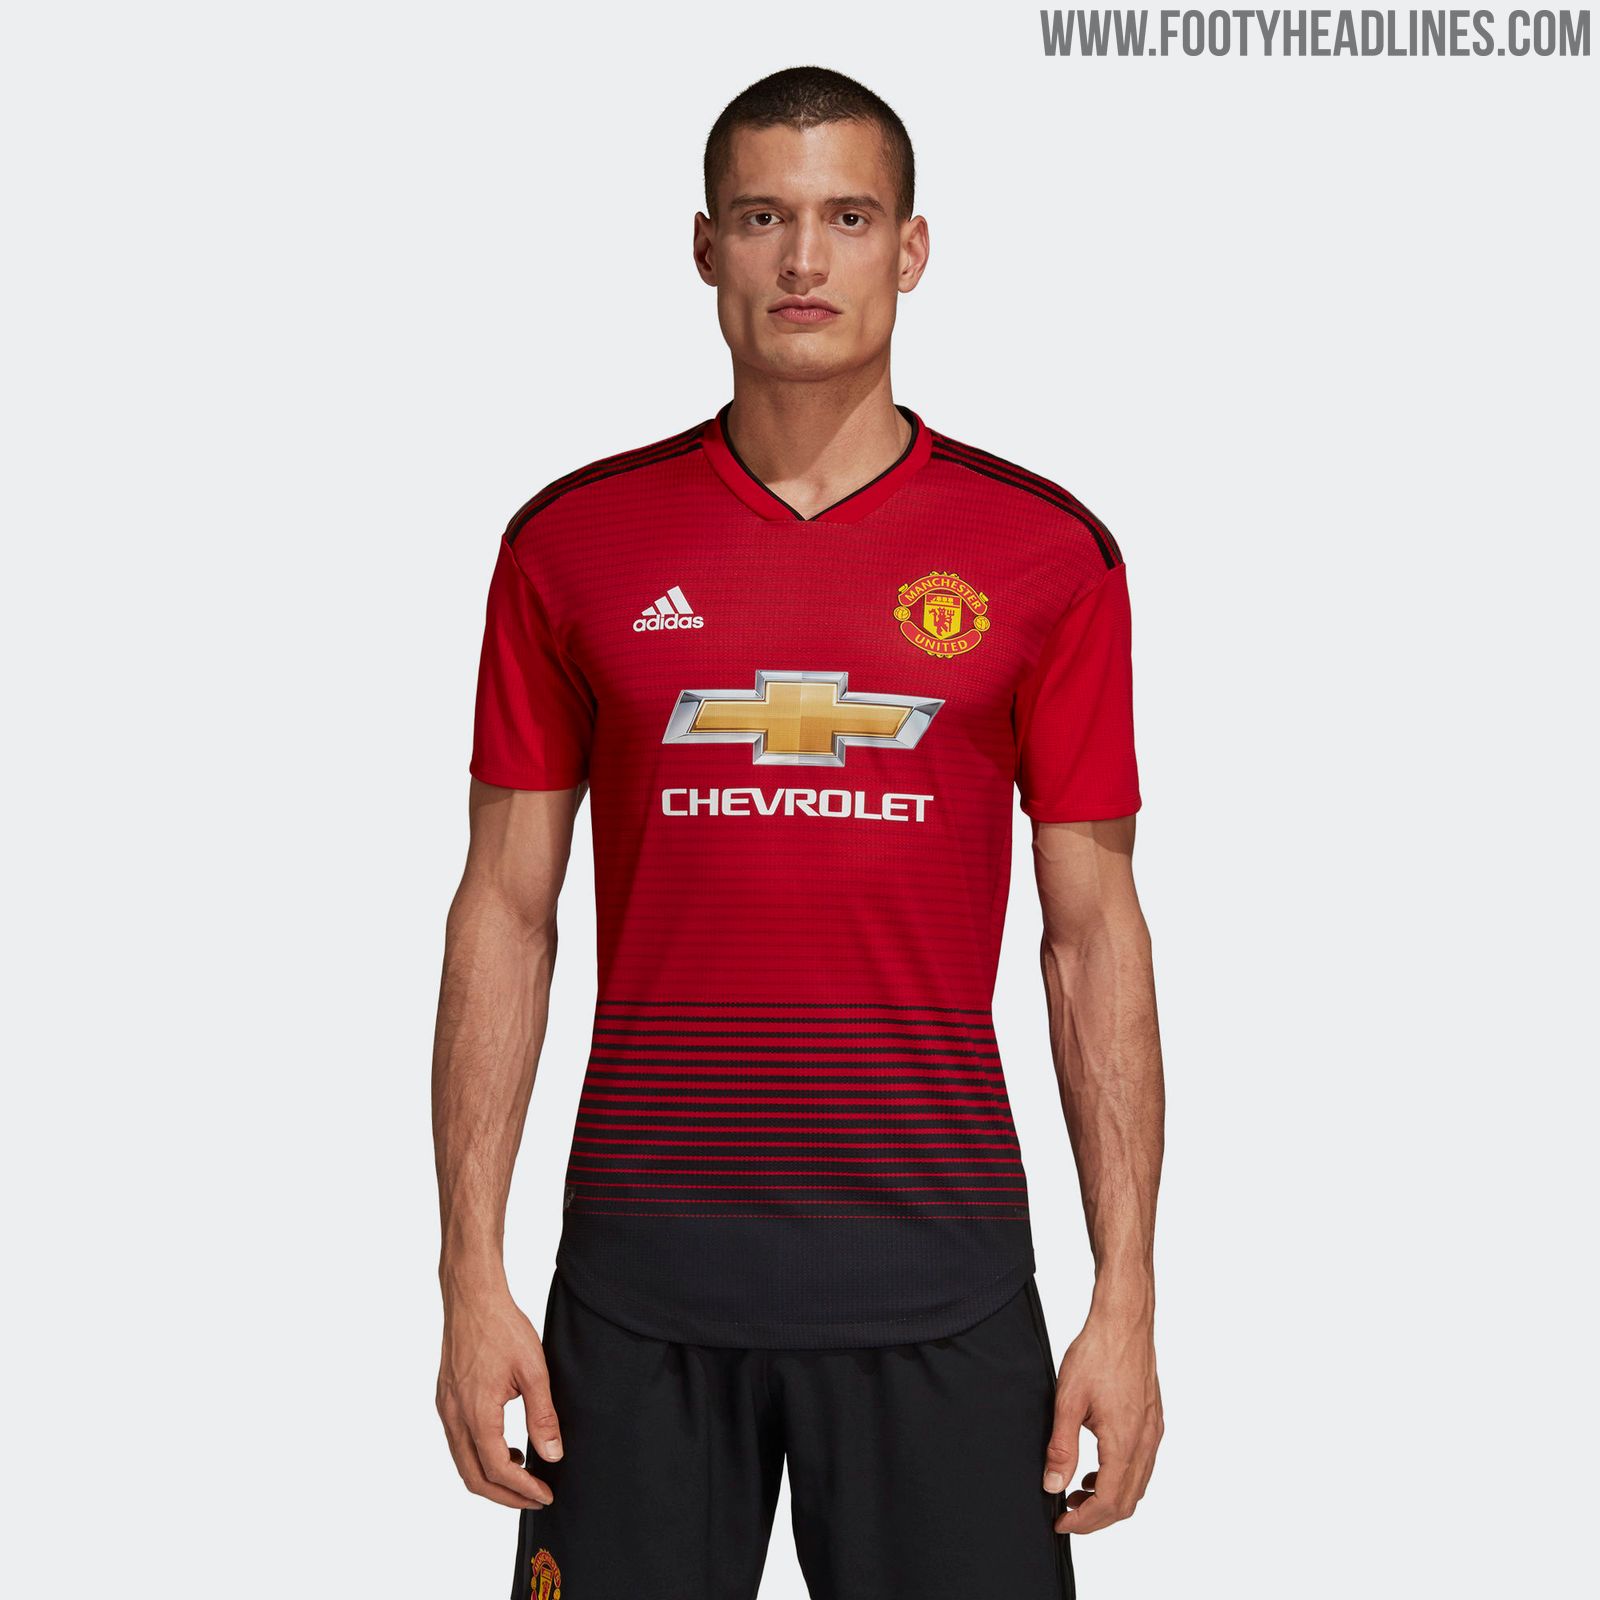 Manchester United 18-19 Home Kit Revealed - Footy Headlines